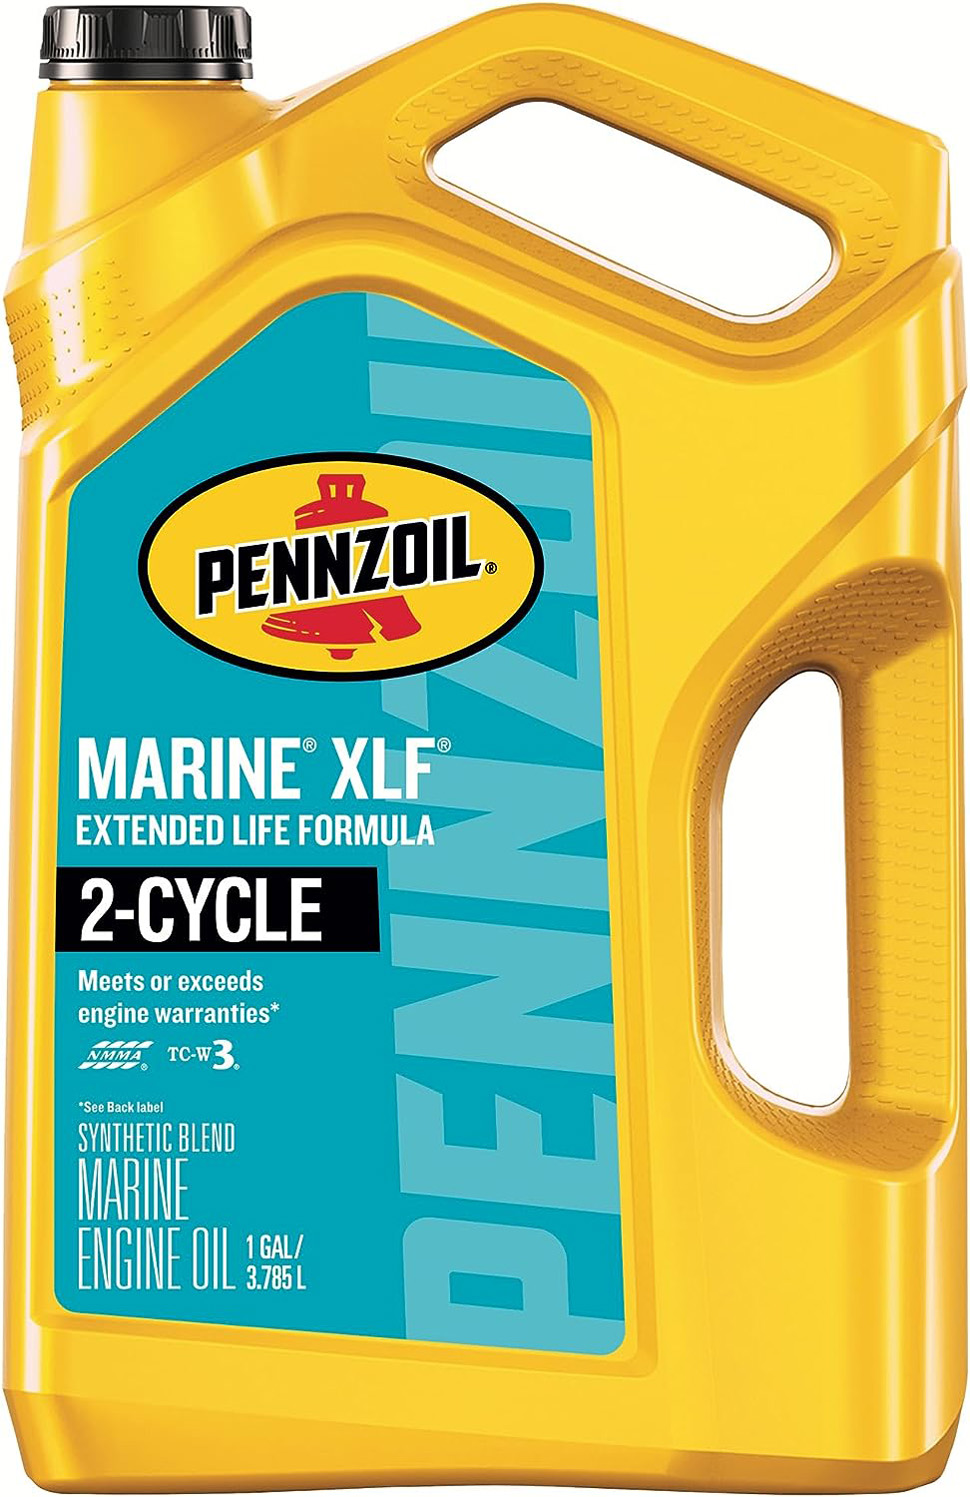 Pennzoil Marine XLF Marine Outboard Synthetic Blend Engine Oil